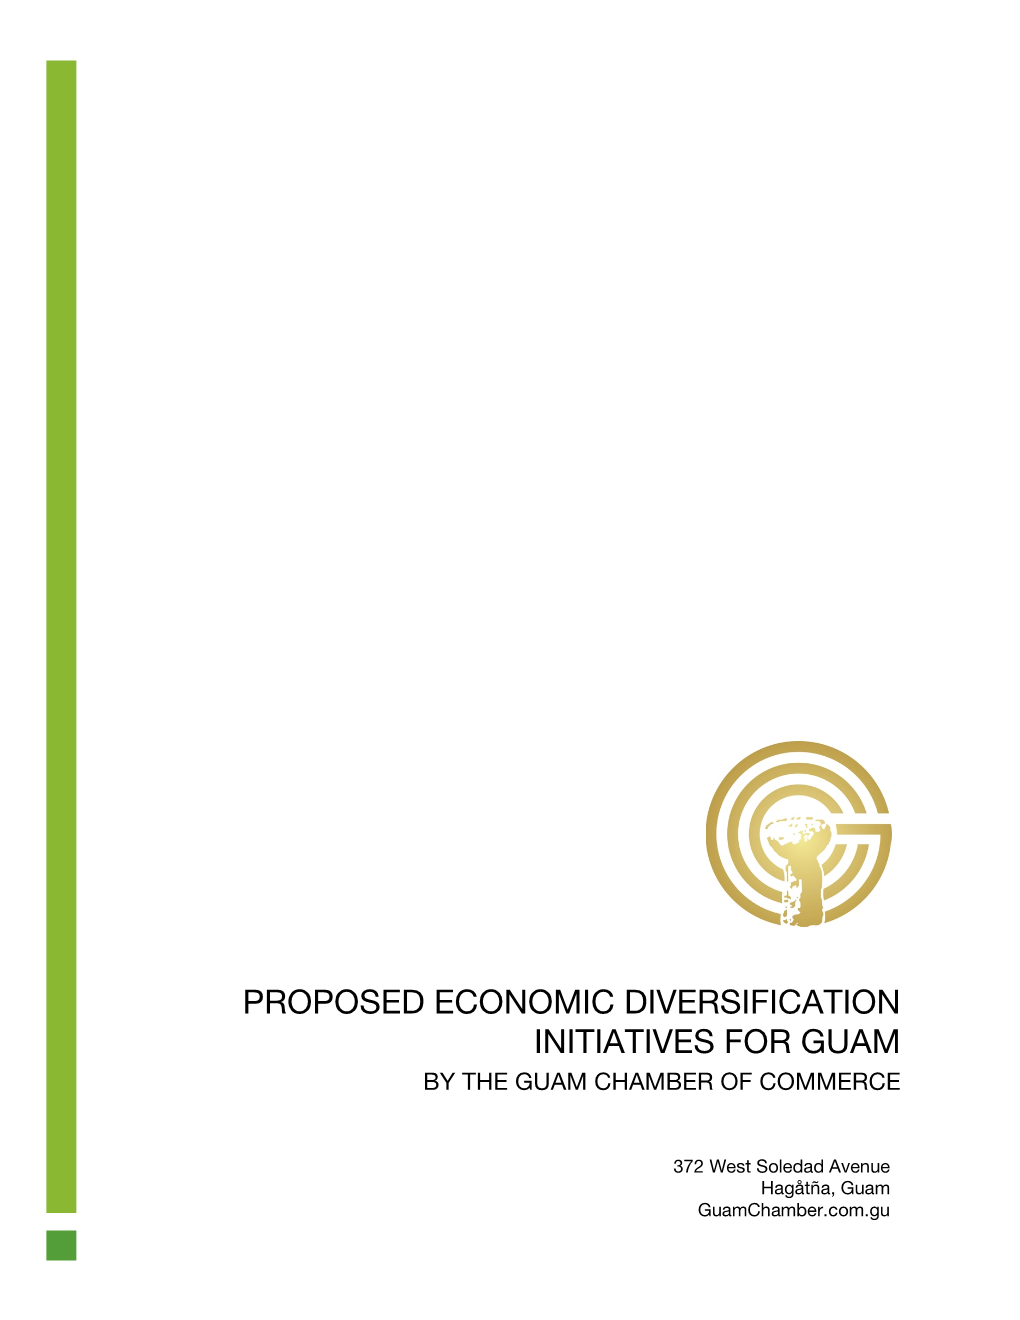 Proposed Economic Diversification Initiatives for Guam by the Guam Chamber of Commerce